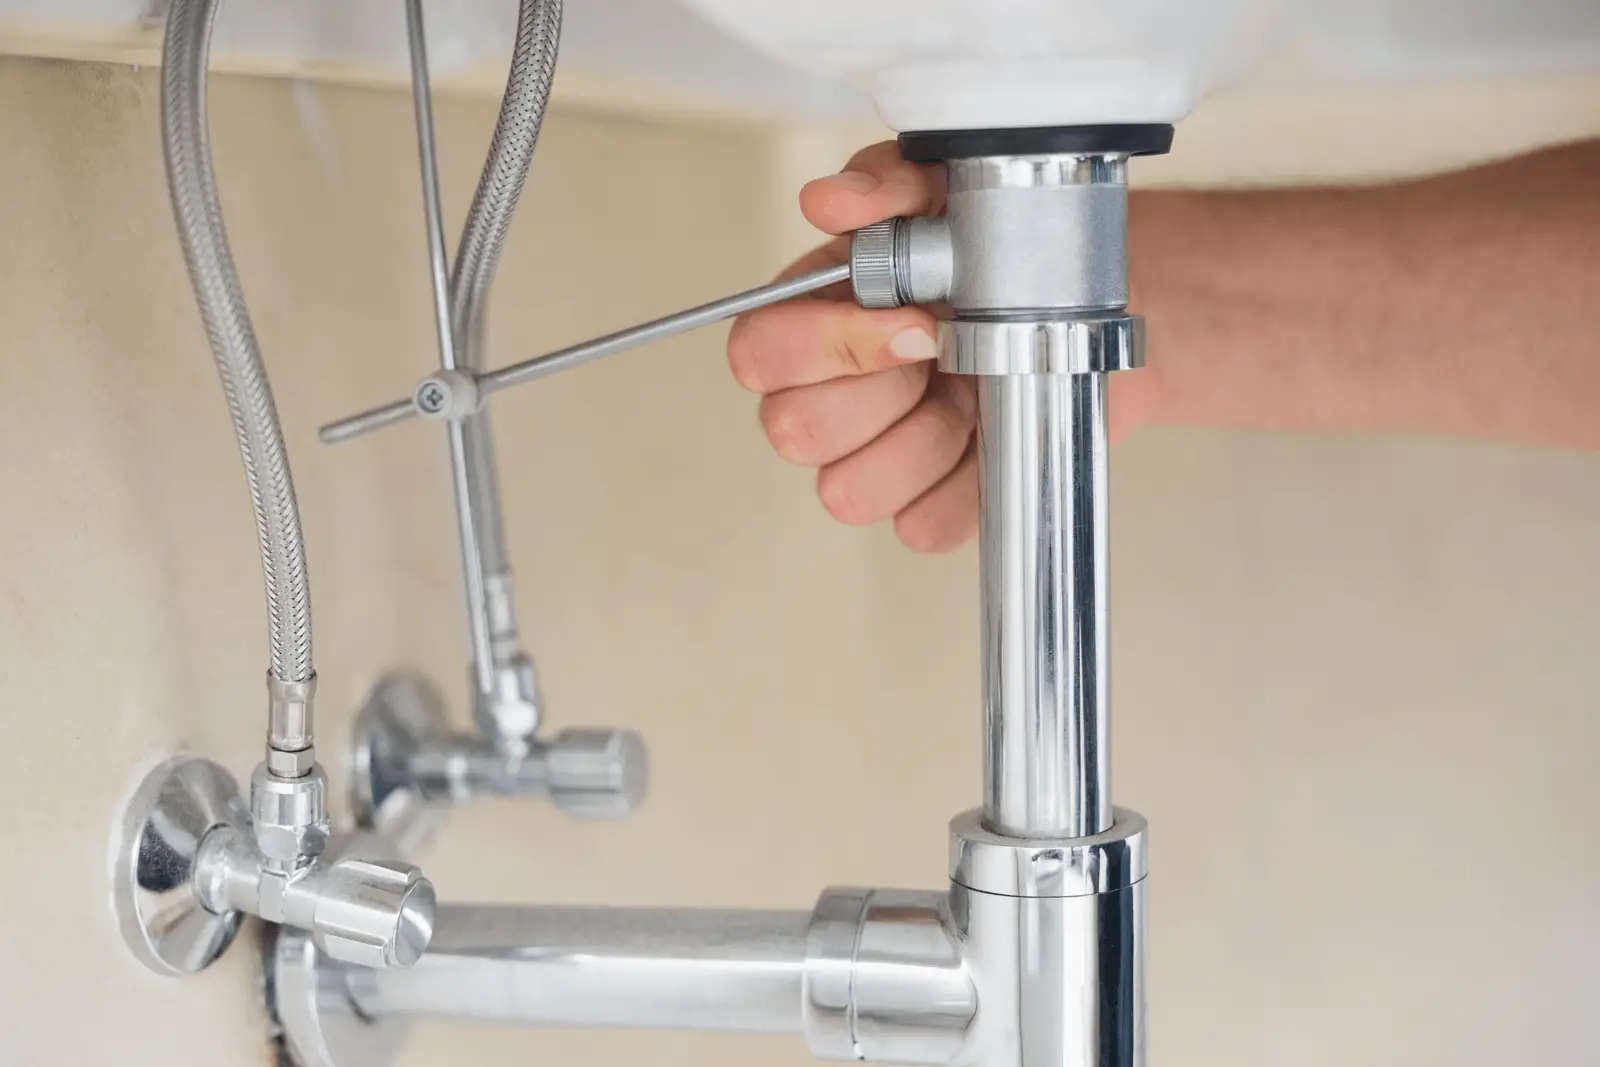 How To Install A Bathroom Sink Plumbing